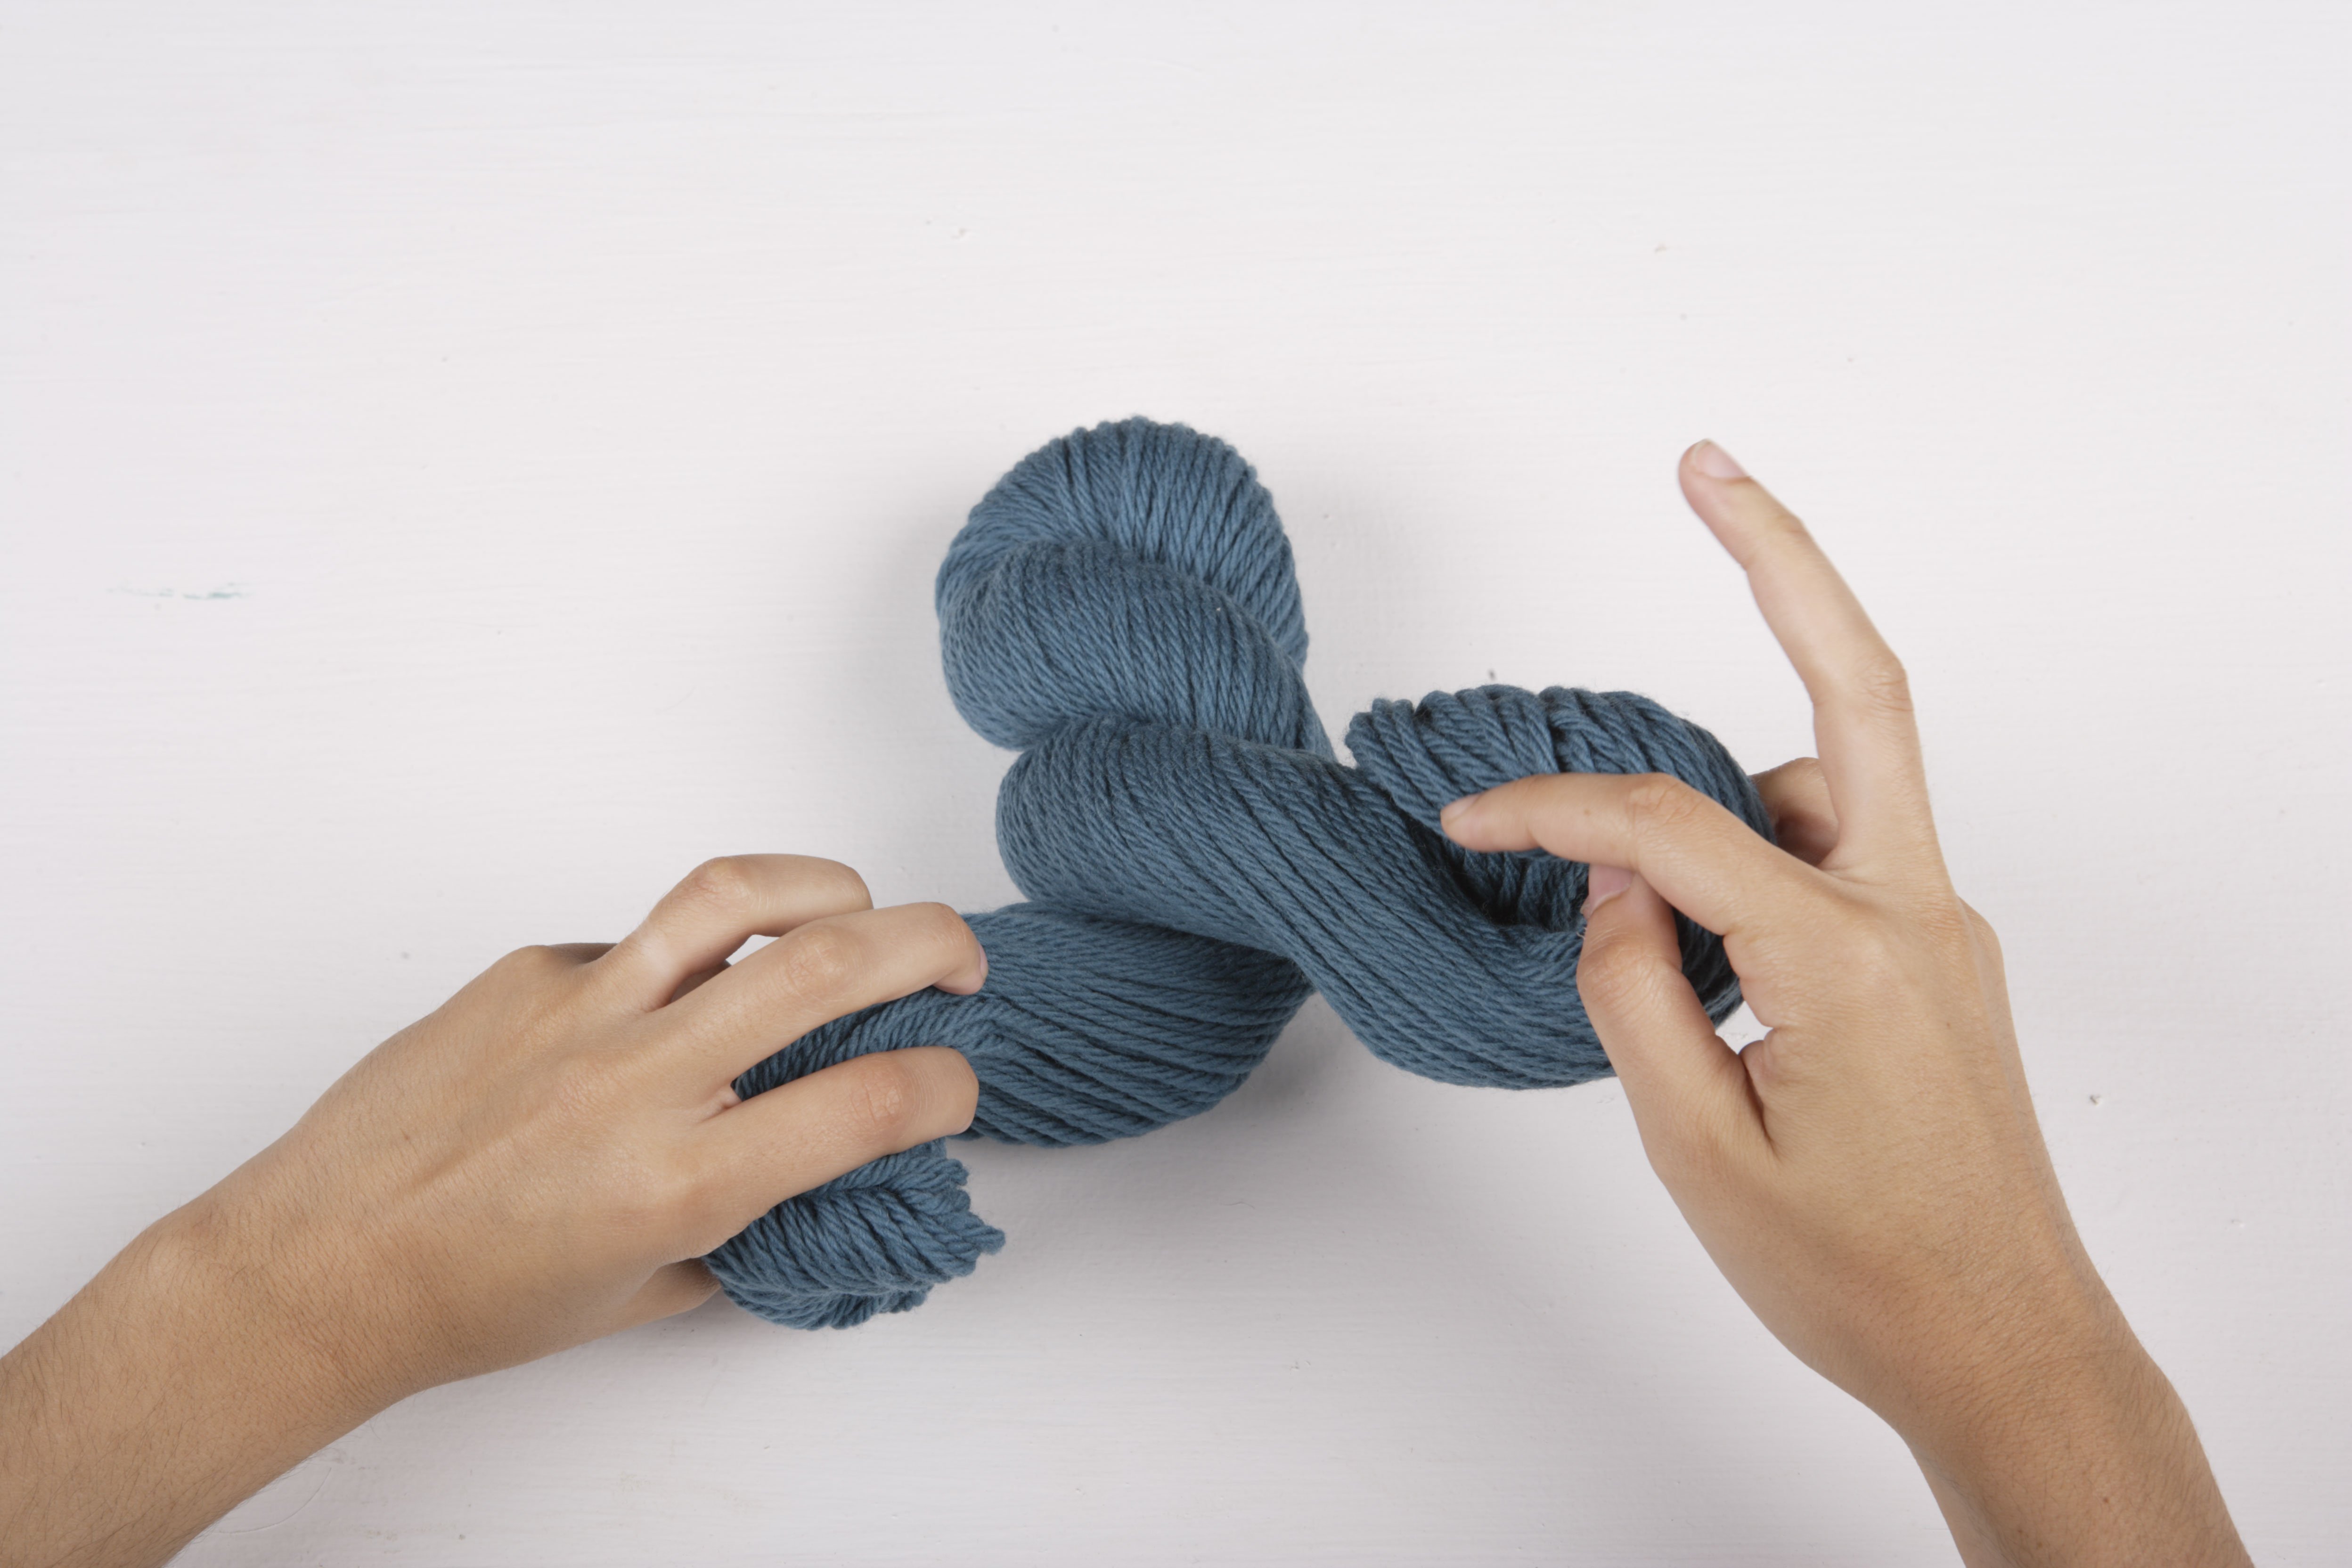 How to Hand-Wind a Skein of Yarn